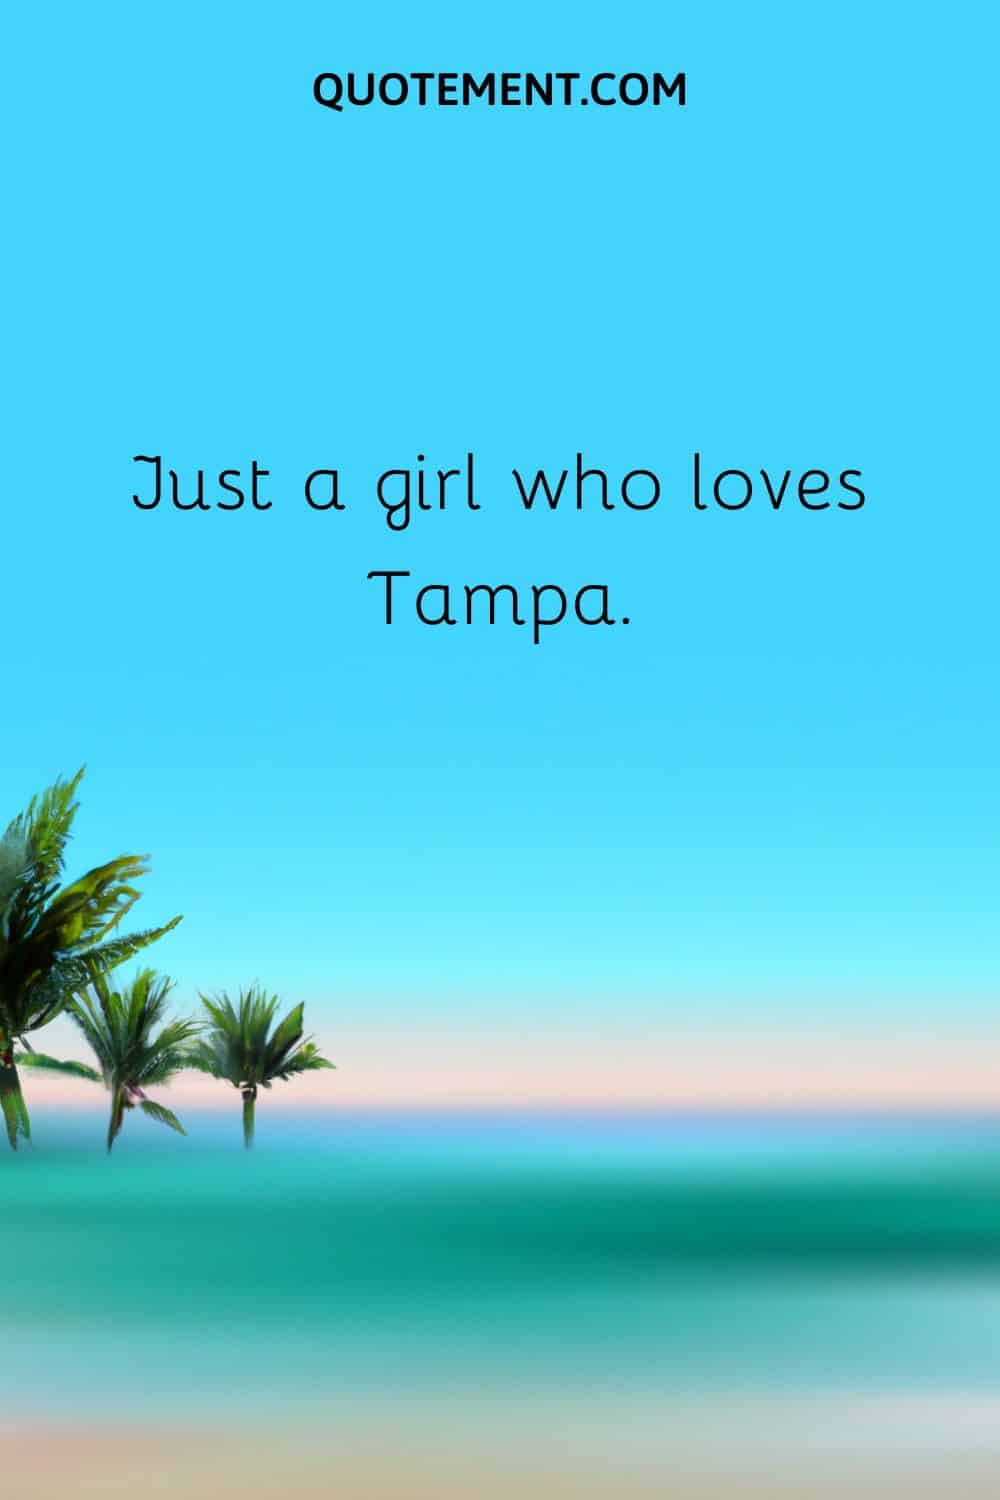 Just a girl who loves Tampa